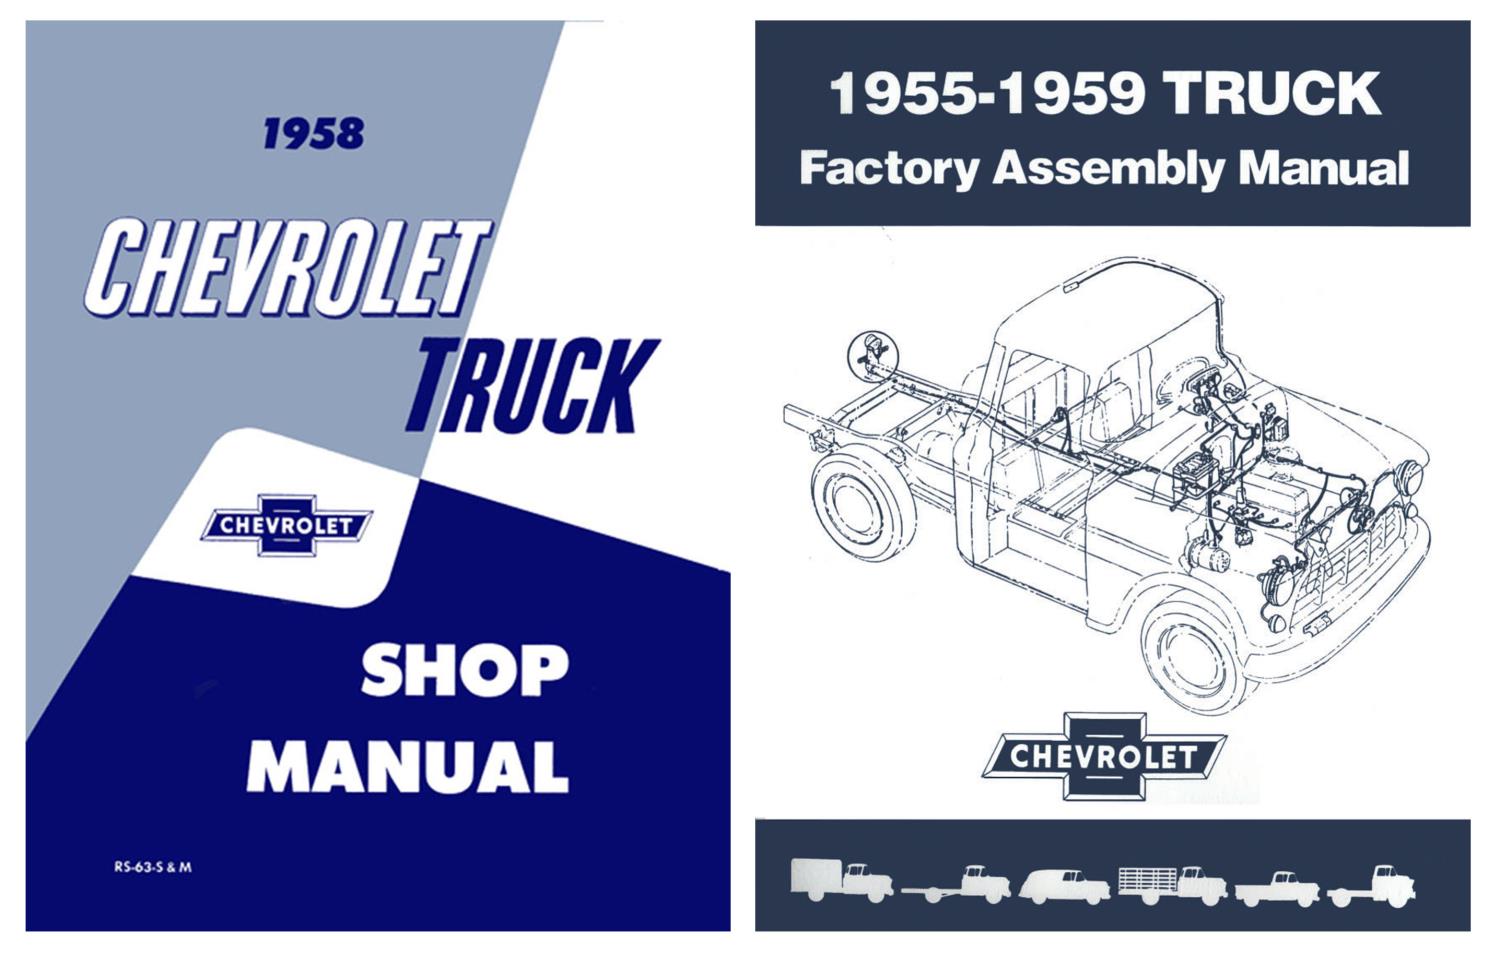 Shop and Assembly Manual Set for 1958 Chevrolet Trucks